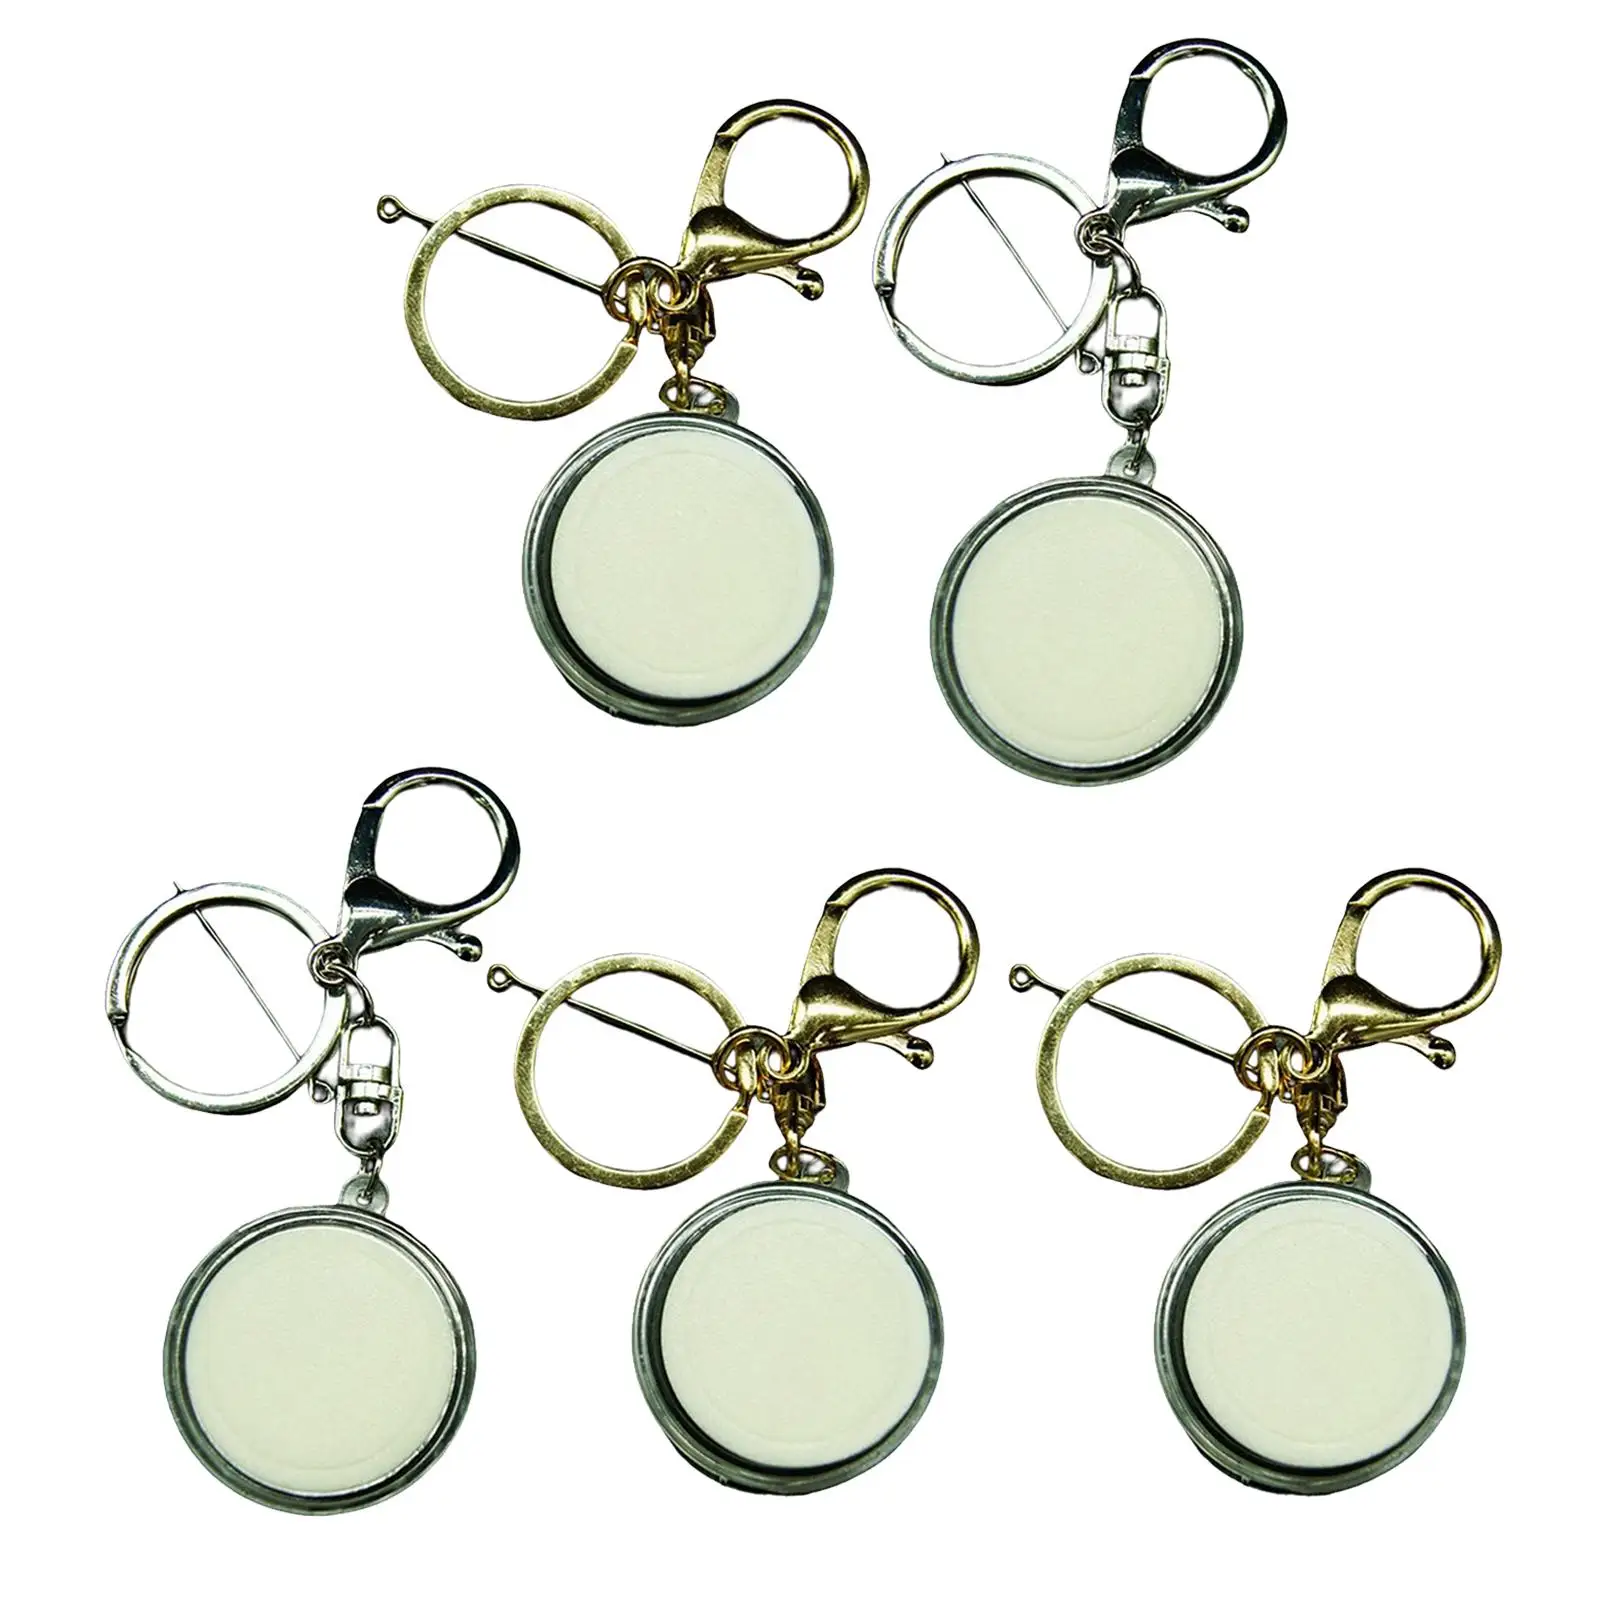 5 Pieces Souvenir Holder , Collection Chains 32mm Decor Ornaments for Room Purse Teachers Gifts